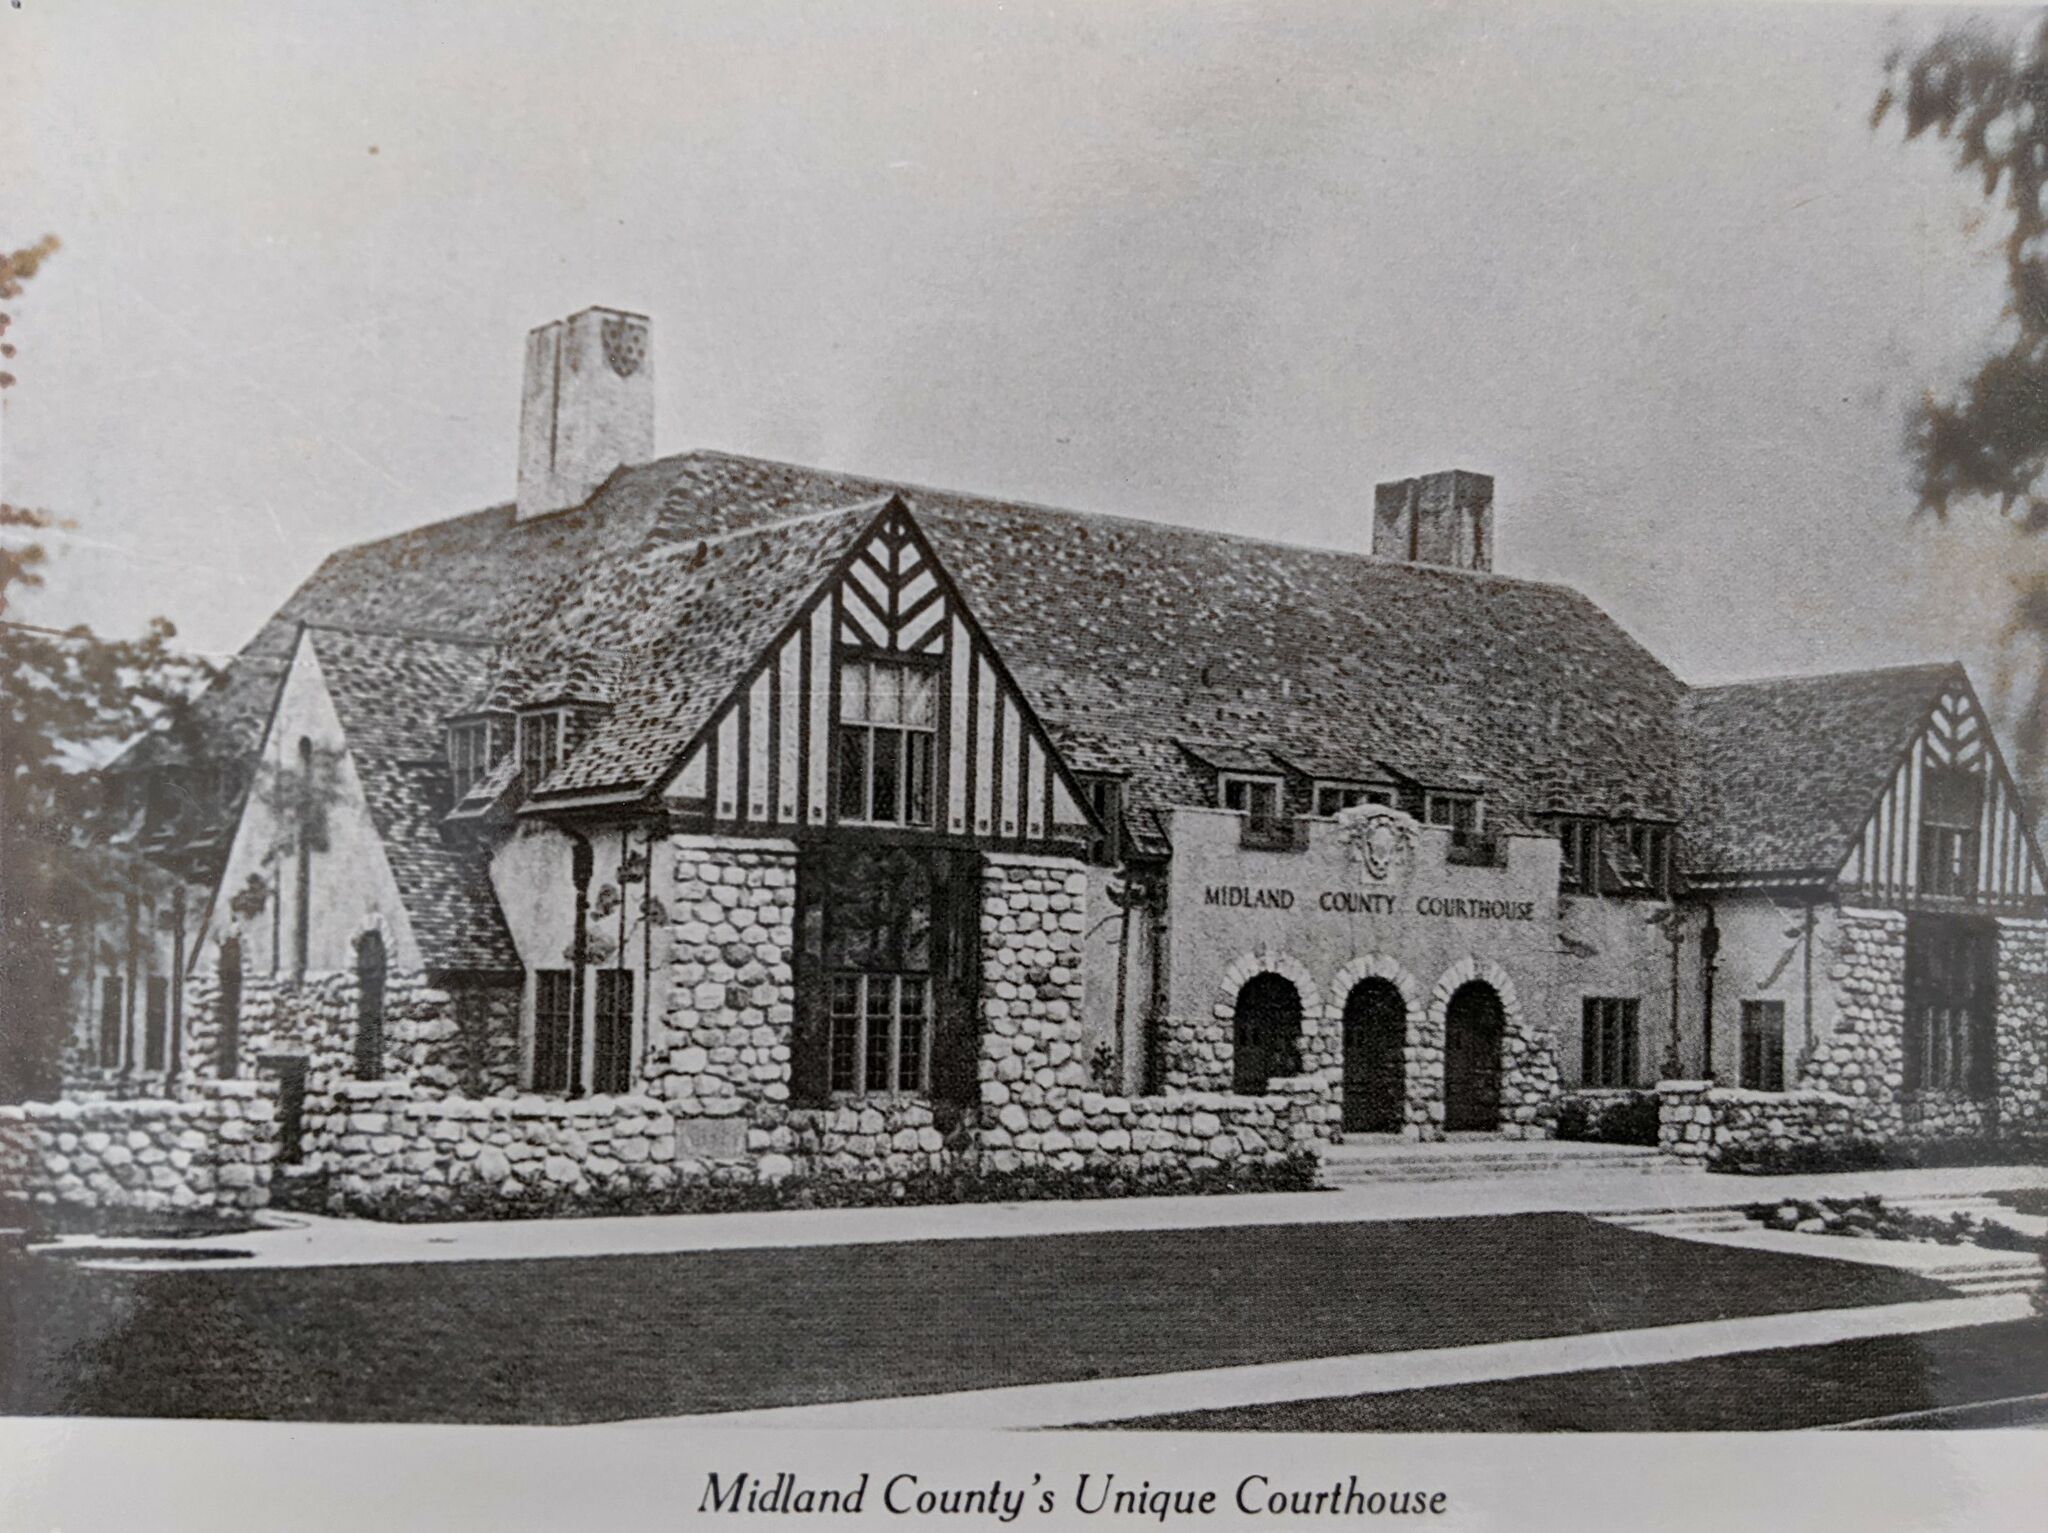 The current Midland County Courthouse has stood for 97 years